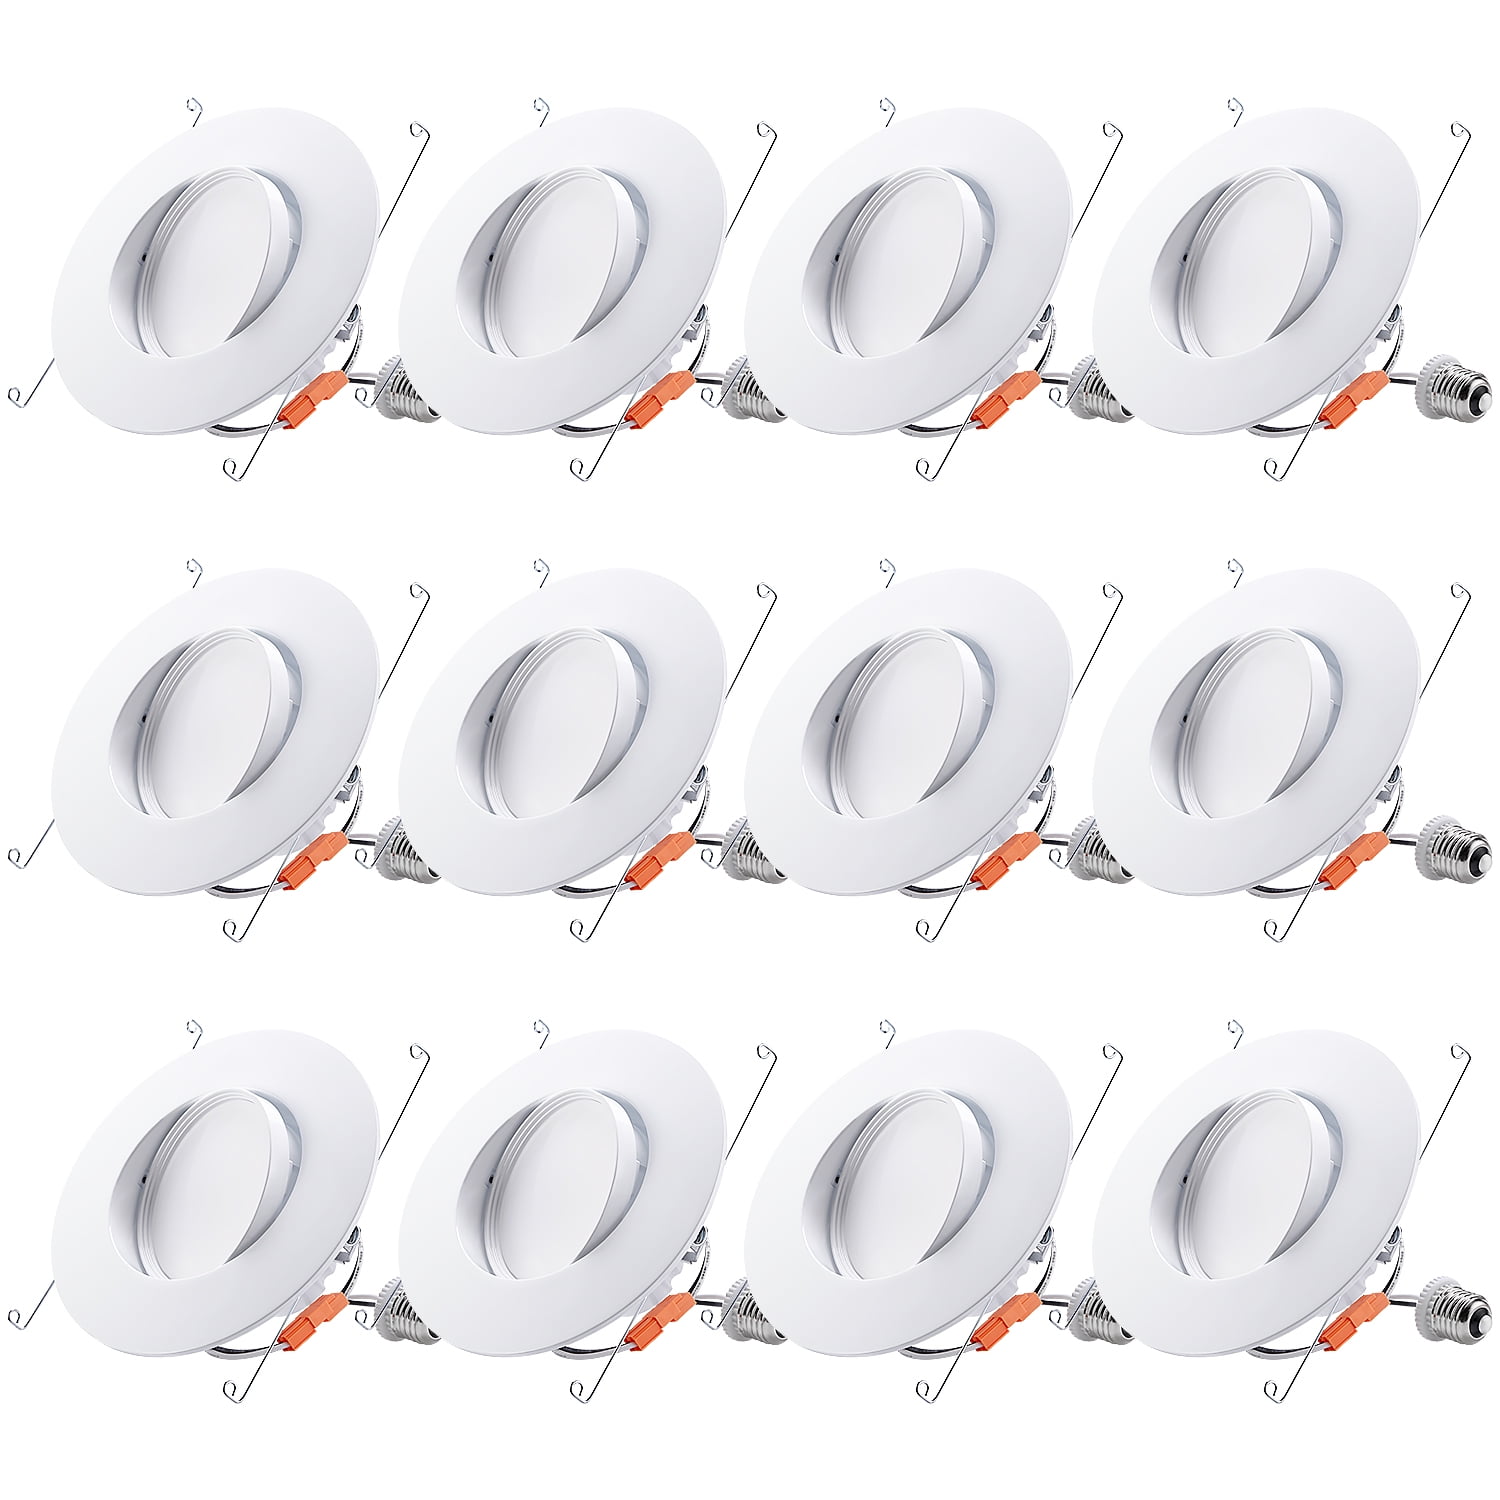 TORCHSTAR 12-Pack 5/6 Inch Adjustable LED Retrofit Downlight, Gimbal  Recessed Lighting, CRI90, Dimmable 13W(100W Eqv), 900lm, UL  Energy Star  Listed, 2700K Soft White, for Pitched, Vaulted Ceiling